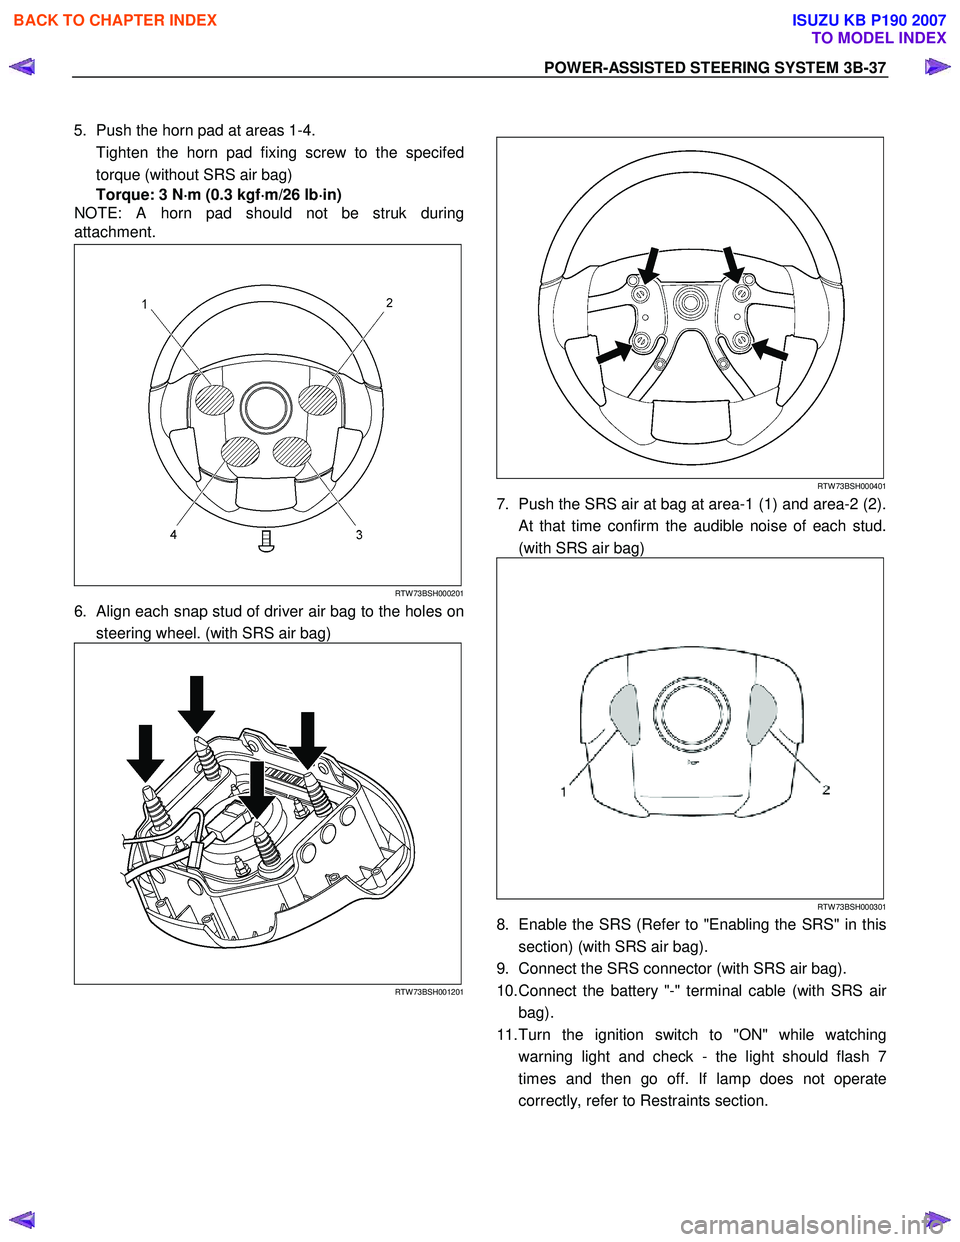 ISUZU KB P190 2007  Workshop Repair Manual POWER-ASSISTED STEERING SYSTEM 3B-37 
 
5.  Push the horn pad at areas 1-4.  
  Tighten the horn pad fixing screw to the specifed torque (without SRS air bag)  
Torque: 3 N ⋅
⋅⋅ 
⋅
m (0.3 kgf 